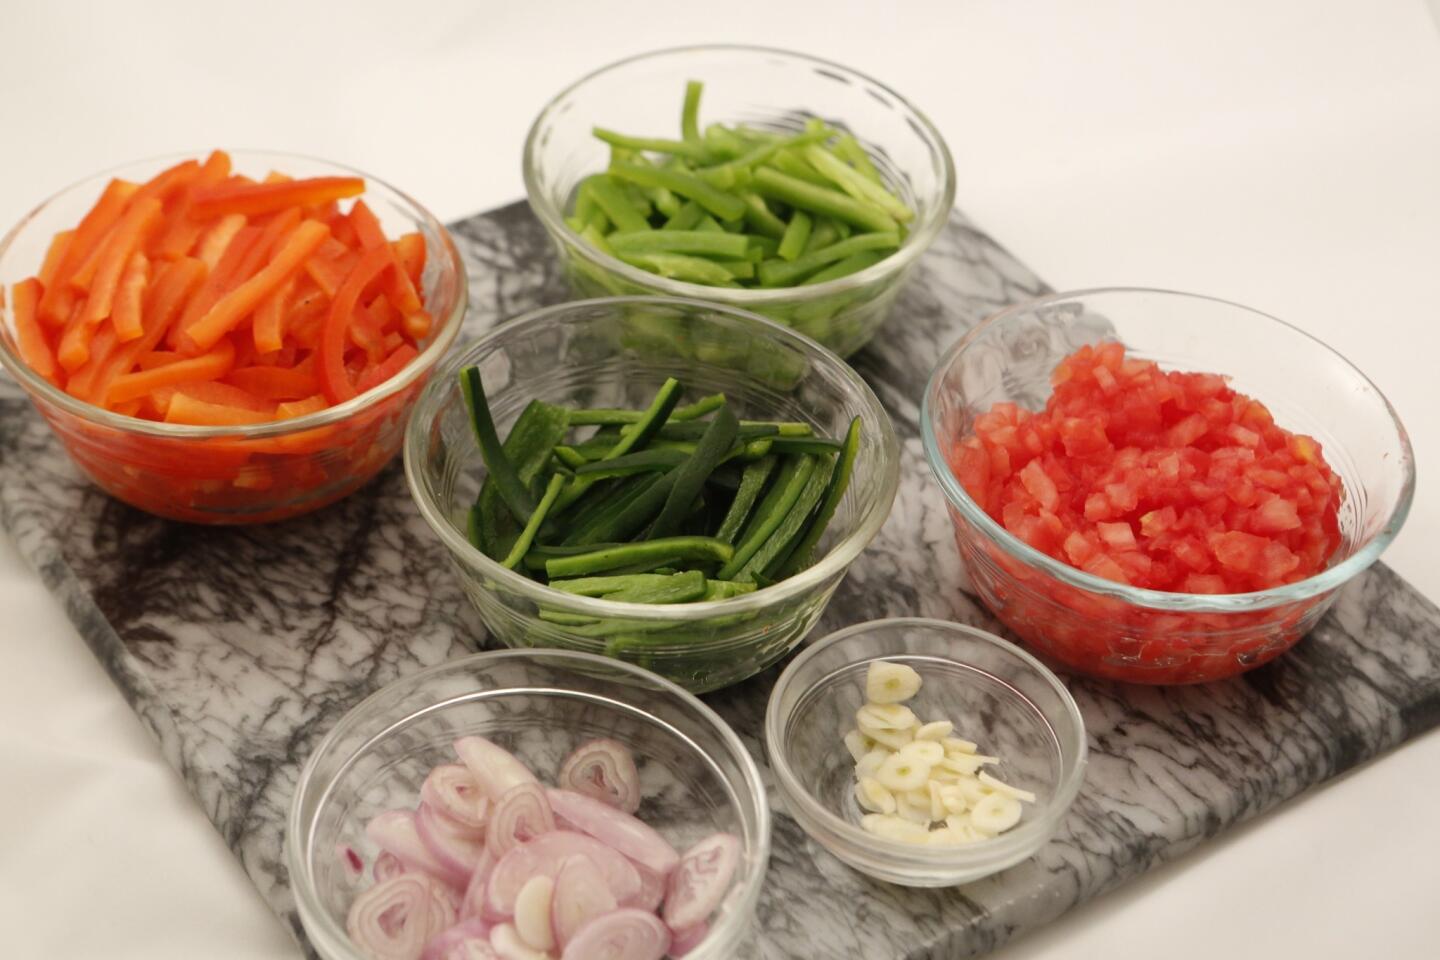 Some of the ingredients: red bell pepper, Poblano pepper, Anaheim pepper, chopped tomato, sliced shallot and garlic.